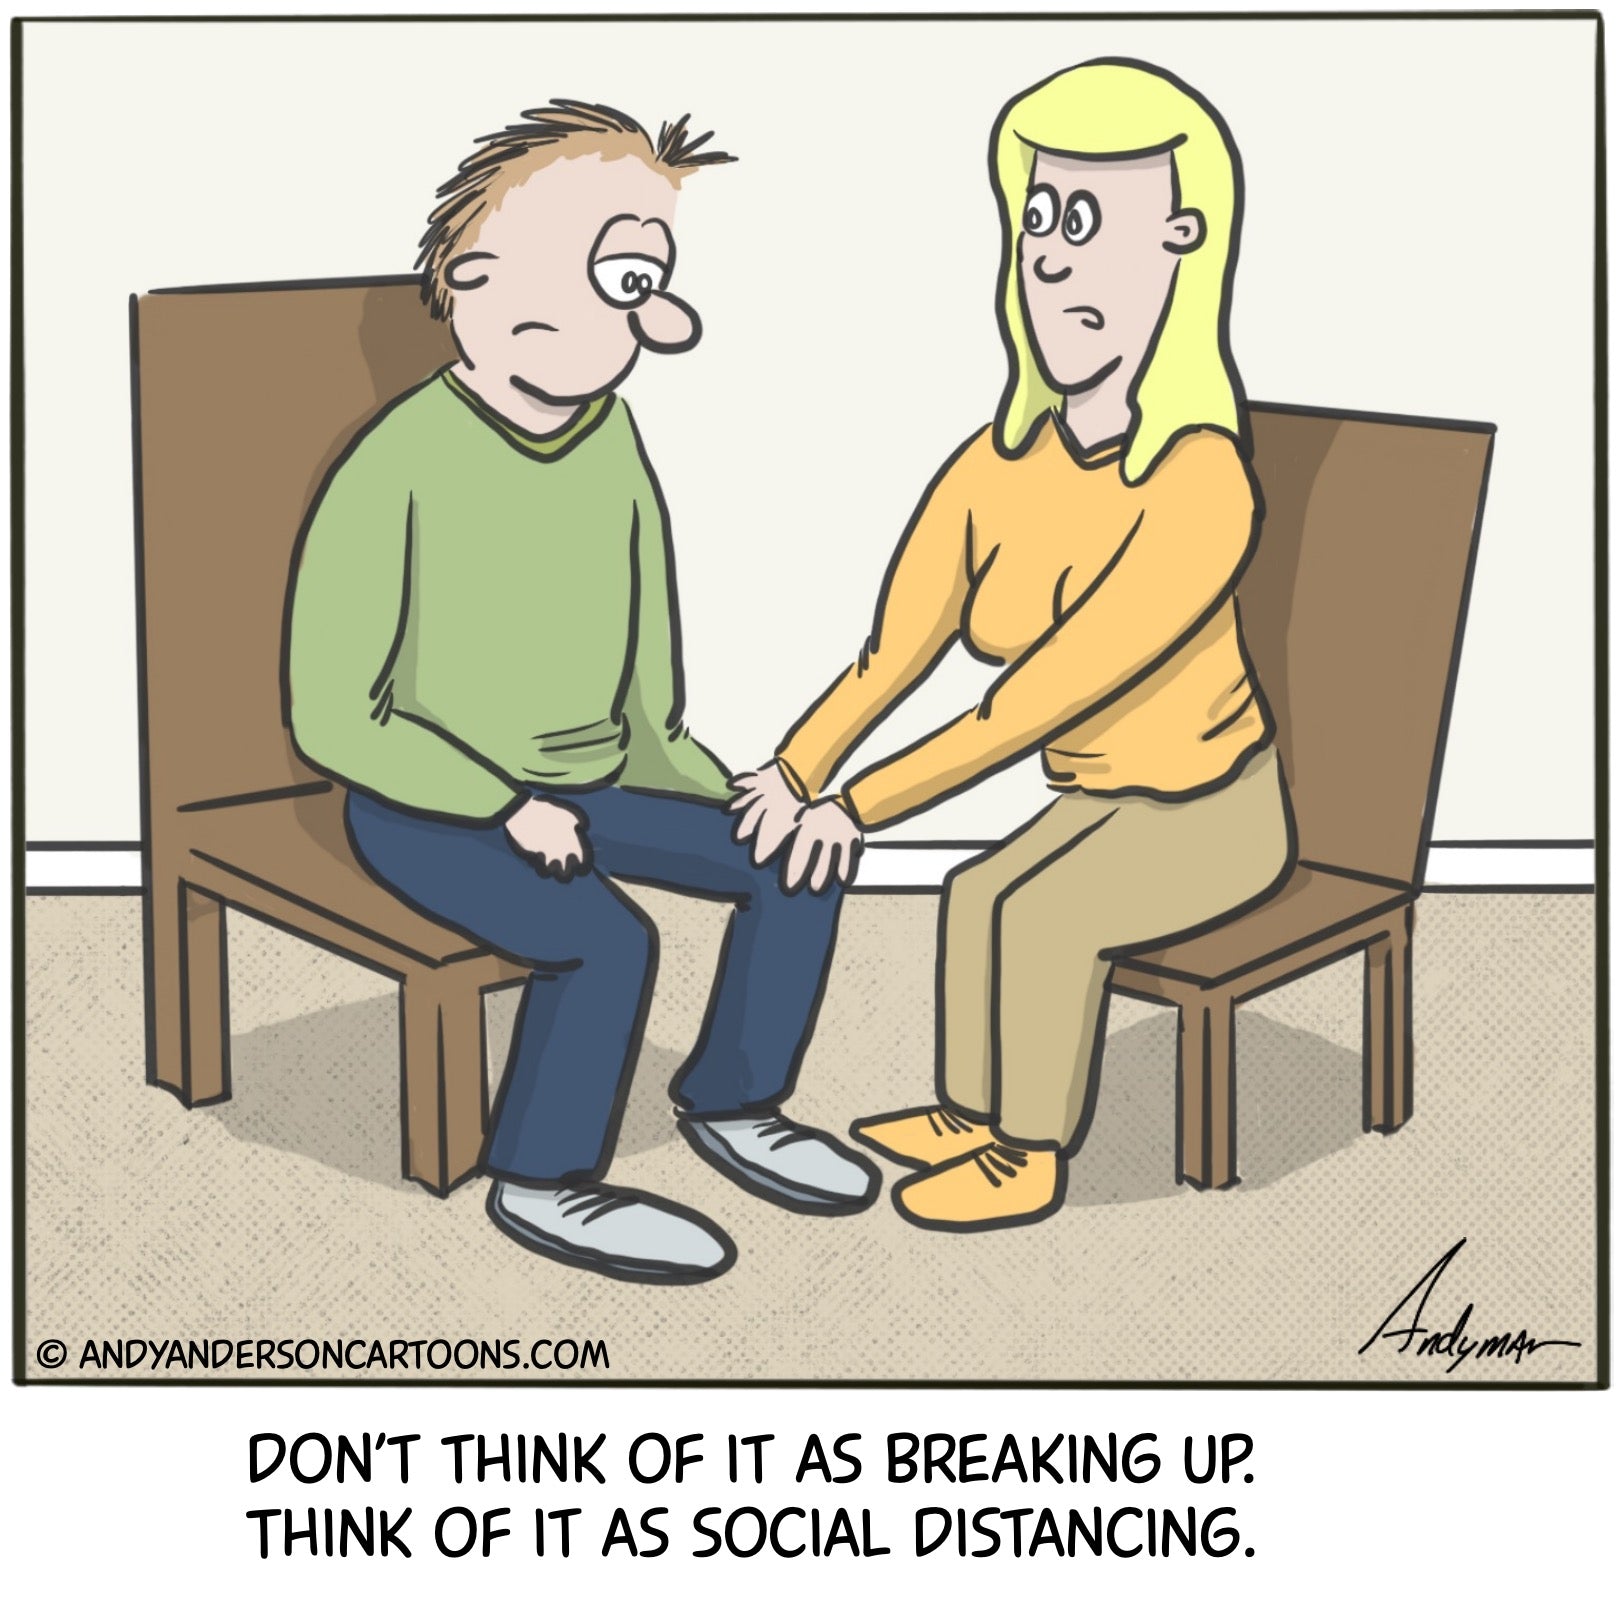 Cartoon about breaking up during the COVID19 crisis